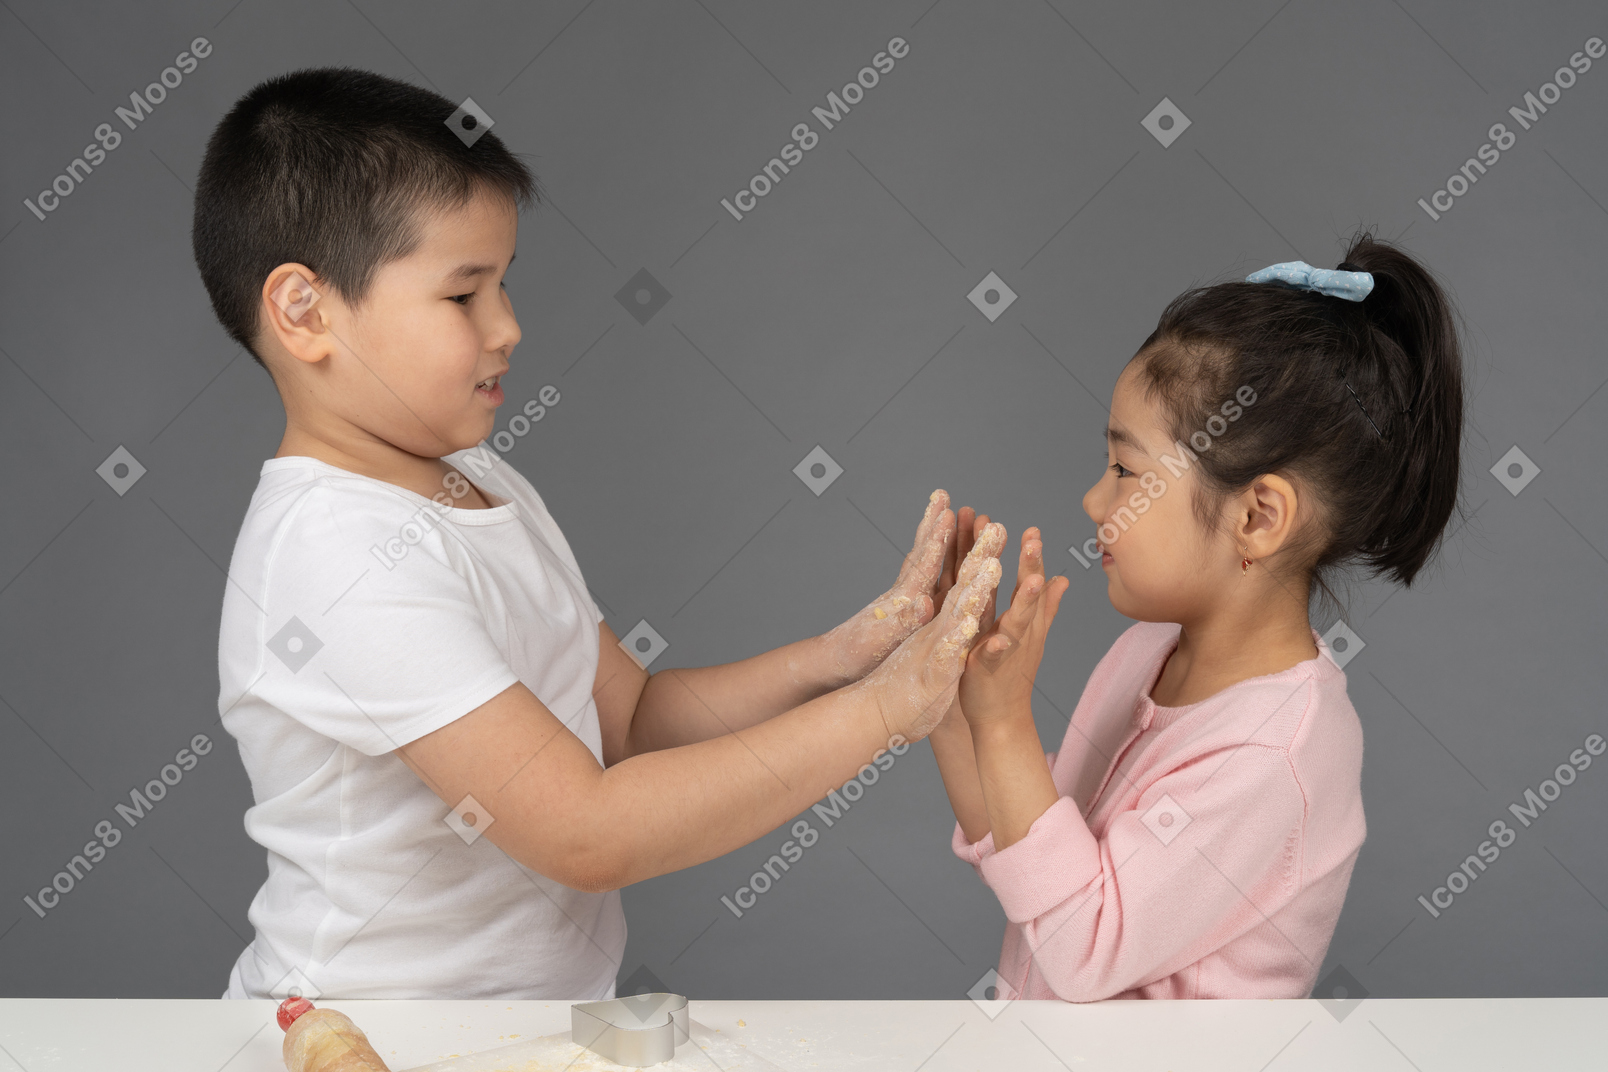 Brother and sister giving each other a high five